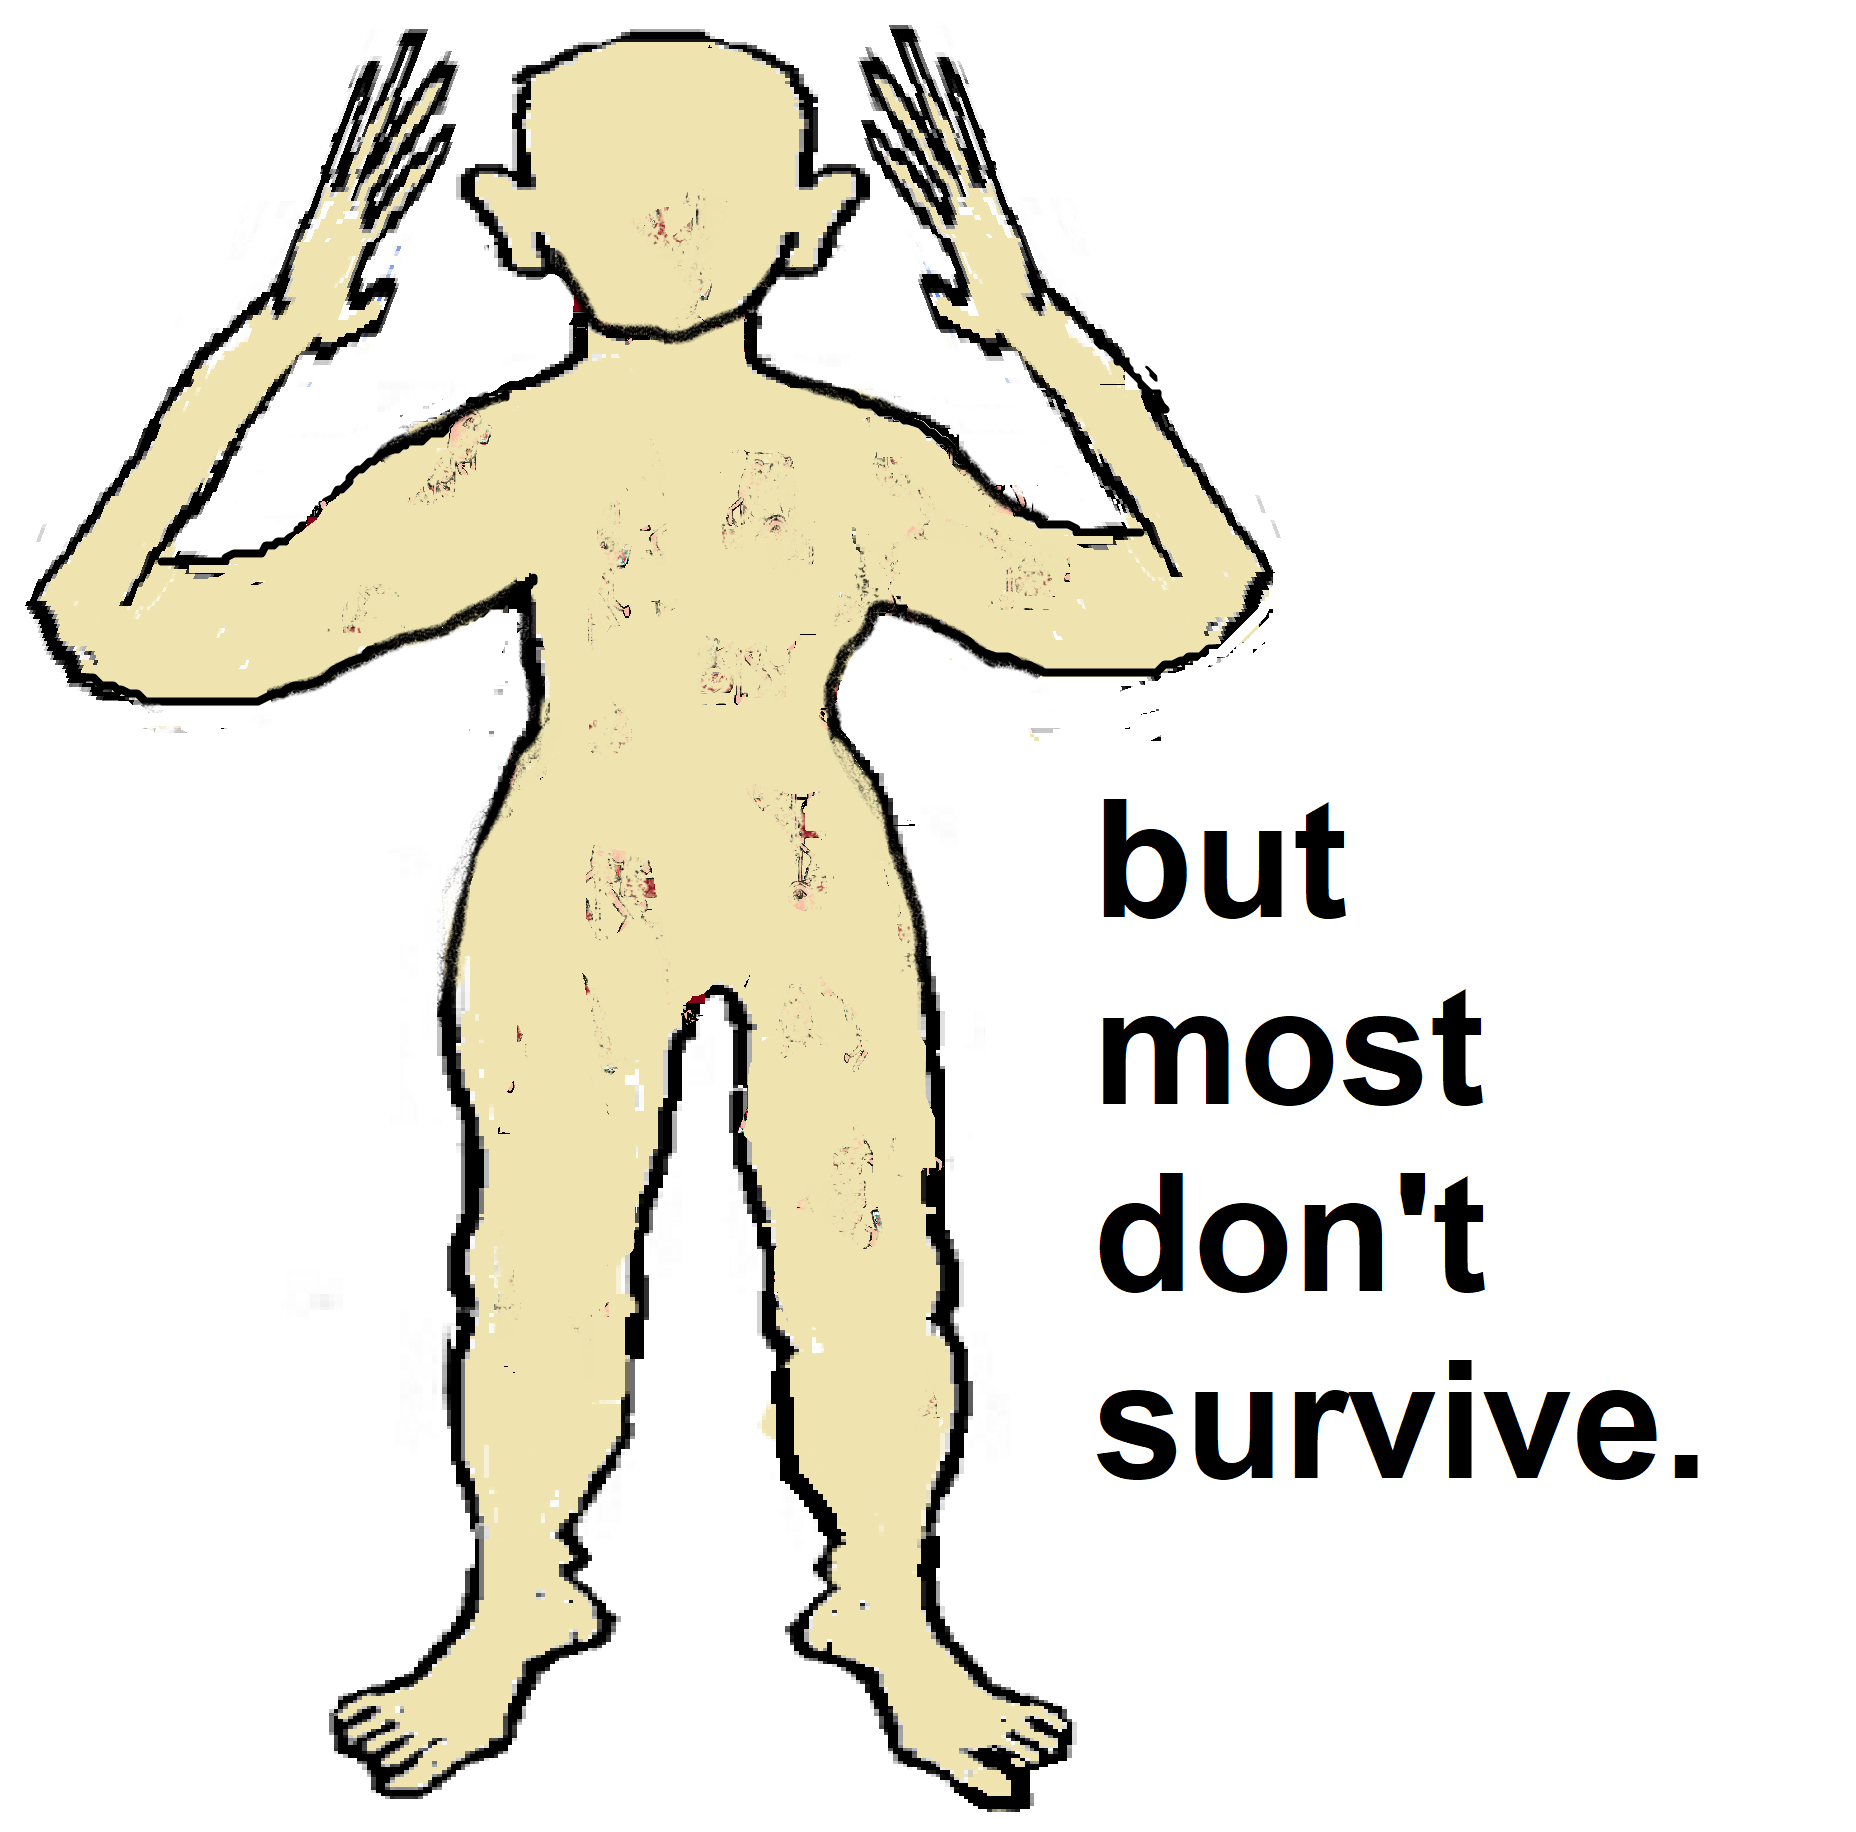 travel throughout the body but most dont survive - 1